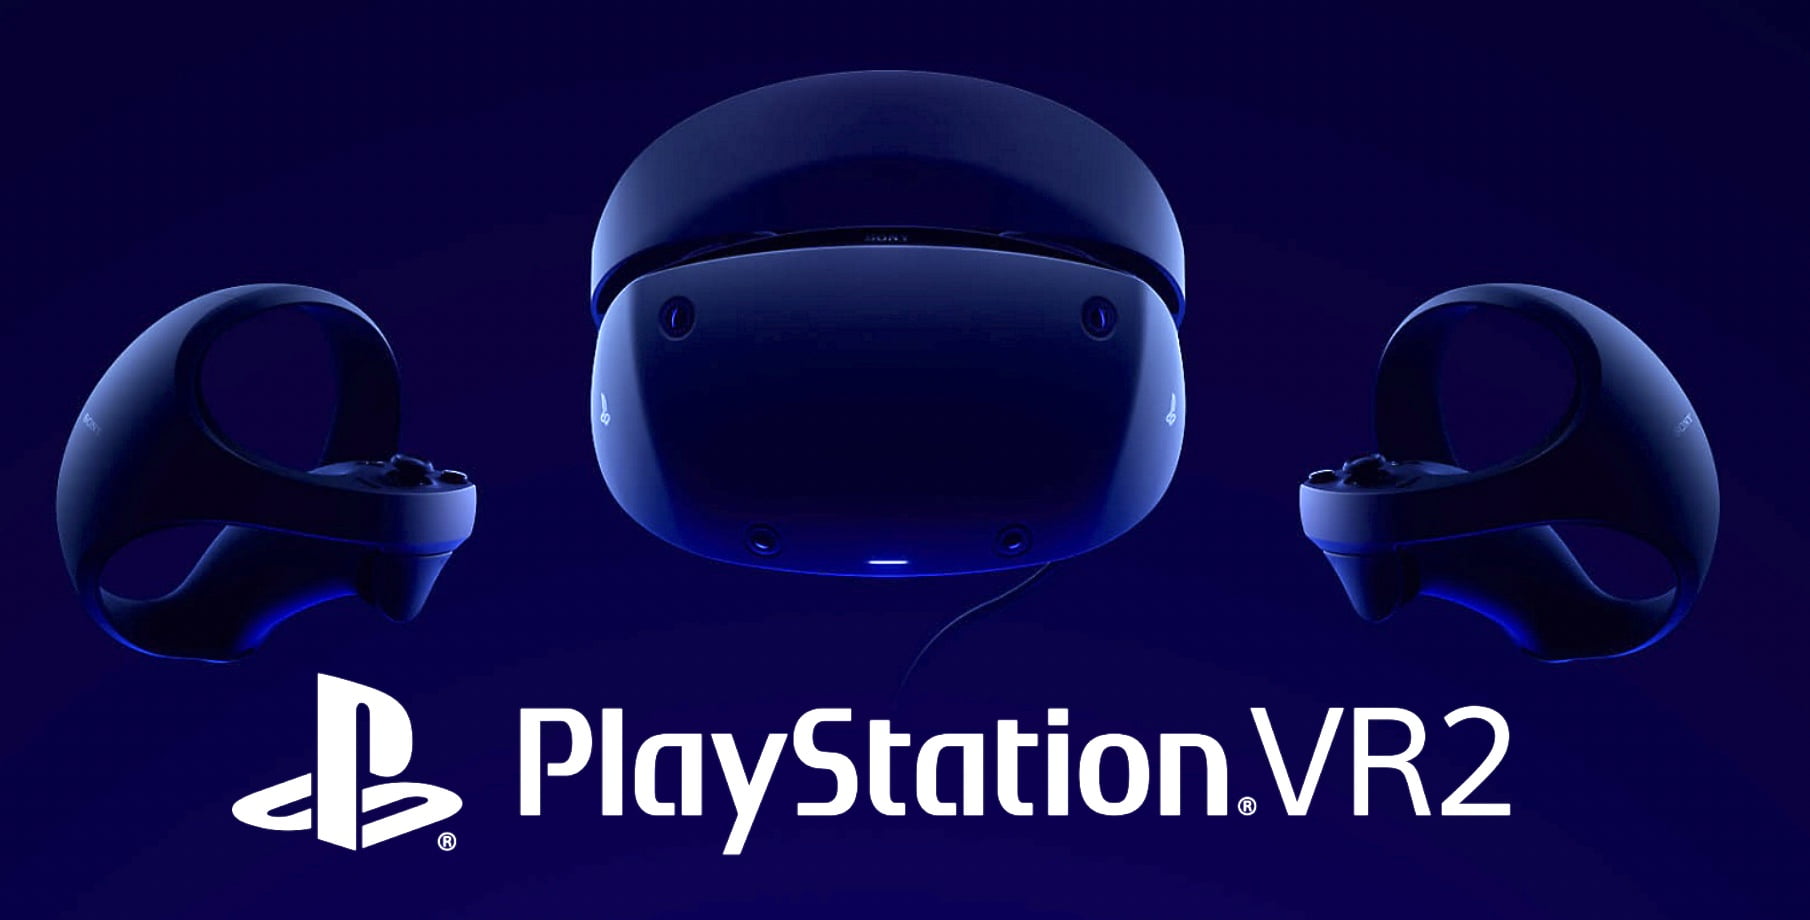 Playstation VR 2 including controllers, logo and lettering.